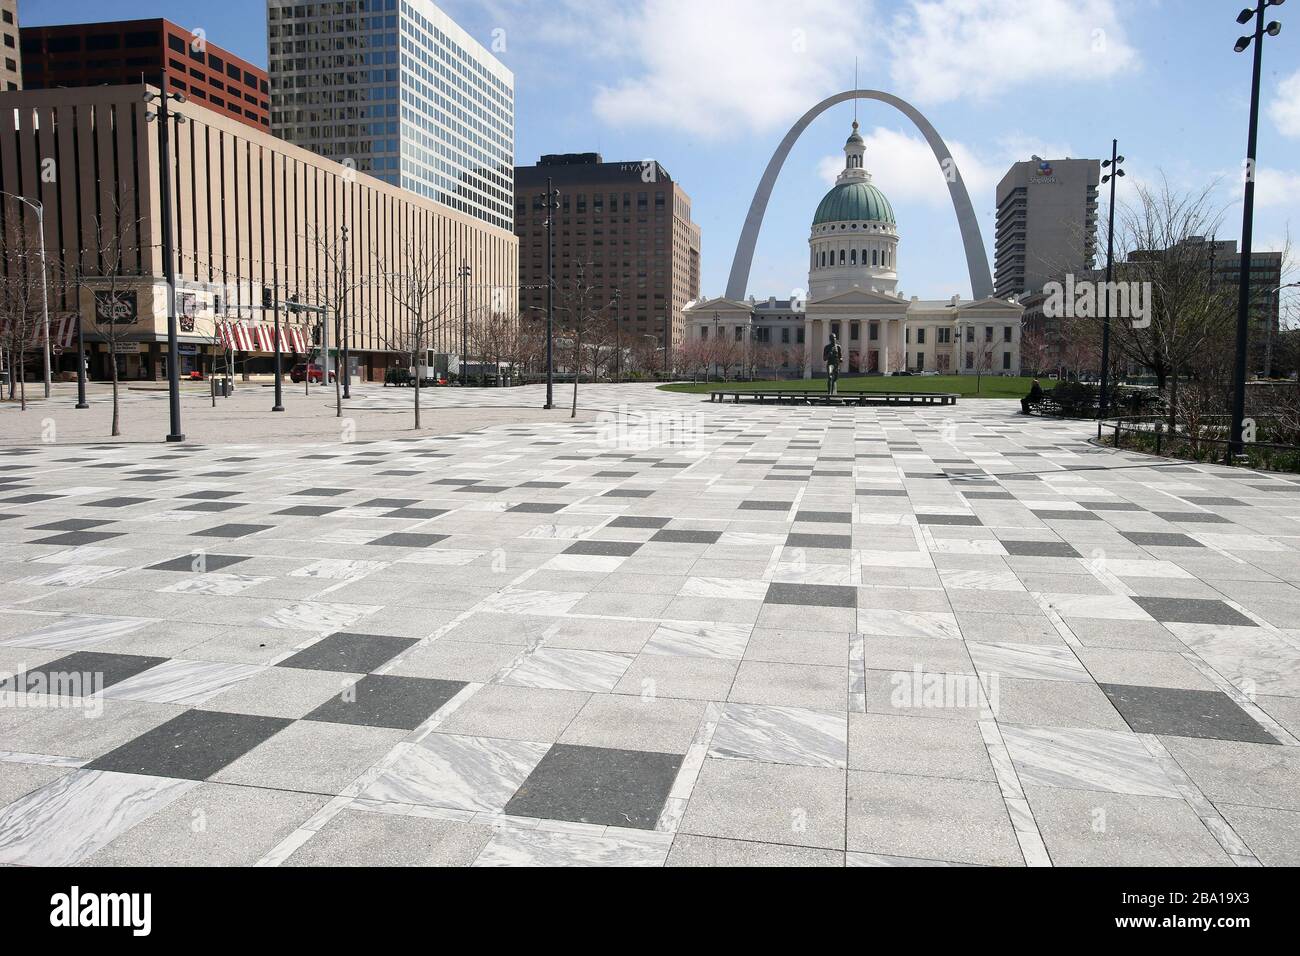 St. Louis, United States. 25th Mar, 2020. The normally busy lunchtime area of Kiener Plaza is all but empty in St. Louis on Wednesday, March 25, 2020. The normally crowded lunchtime area is quiet as stay at home overs have been given to St. Louisans, due to Coronavirus fears. Photo by Bill Greenblatt/UPI Credit: UPI/Alamy Live News Stock Photo